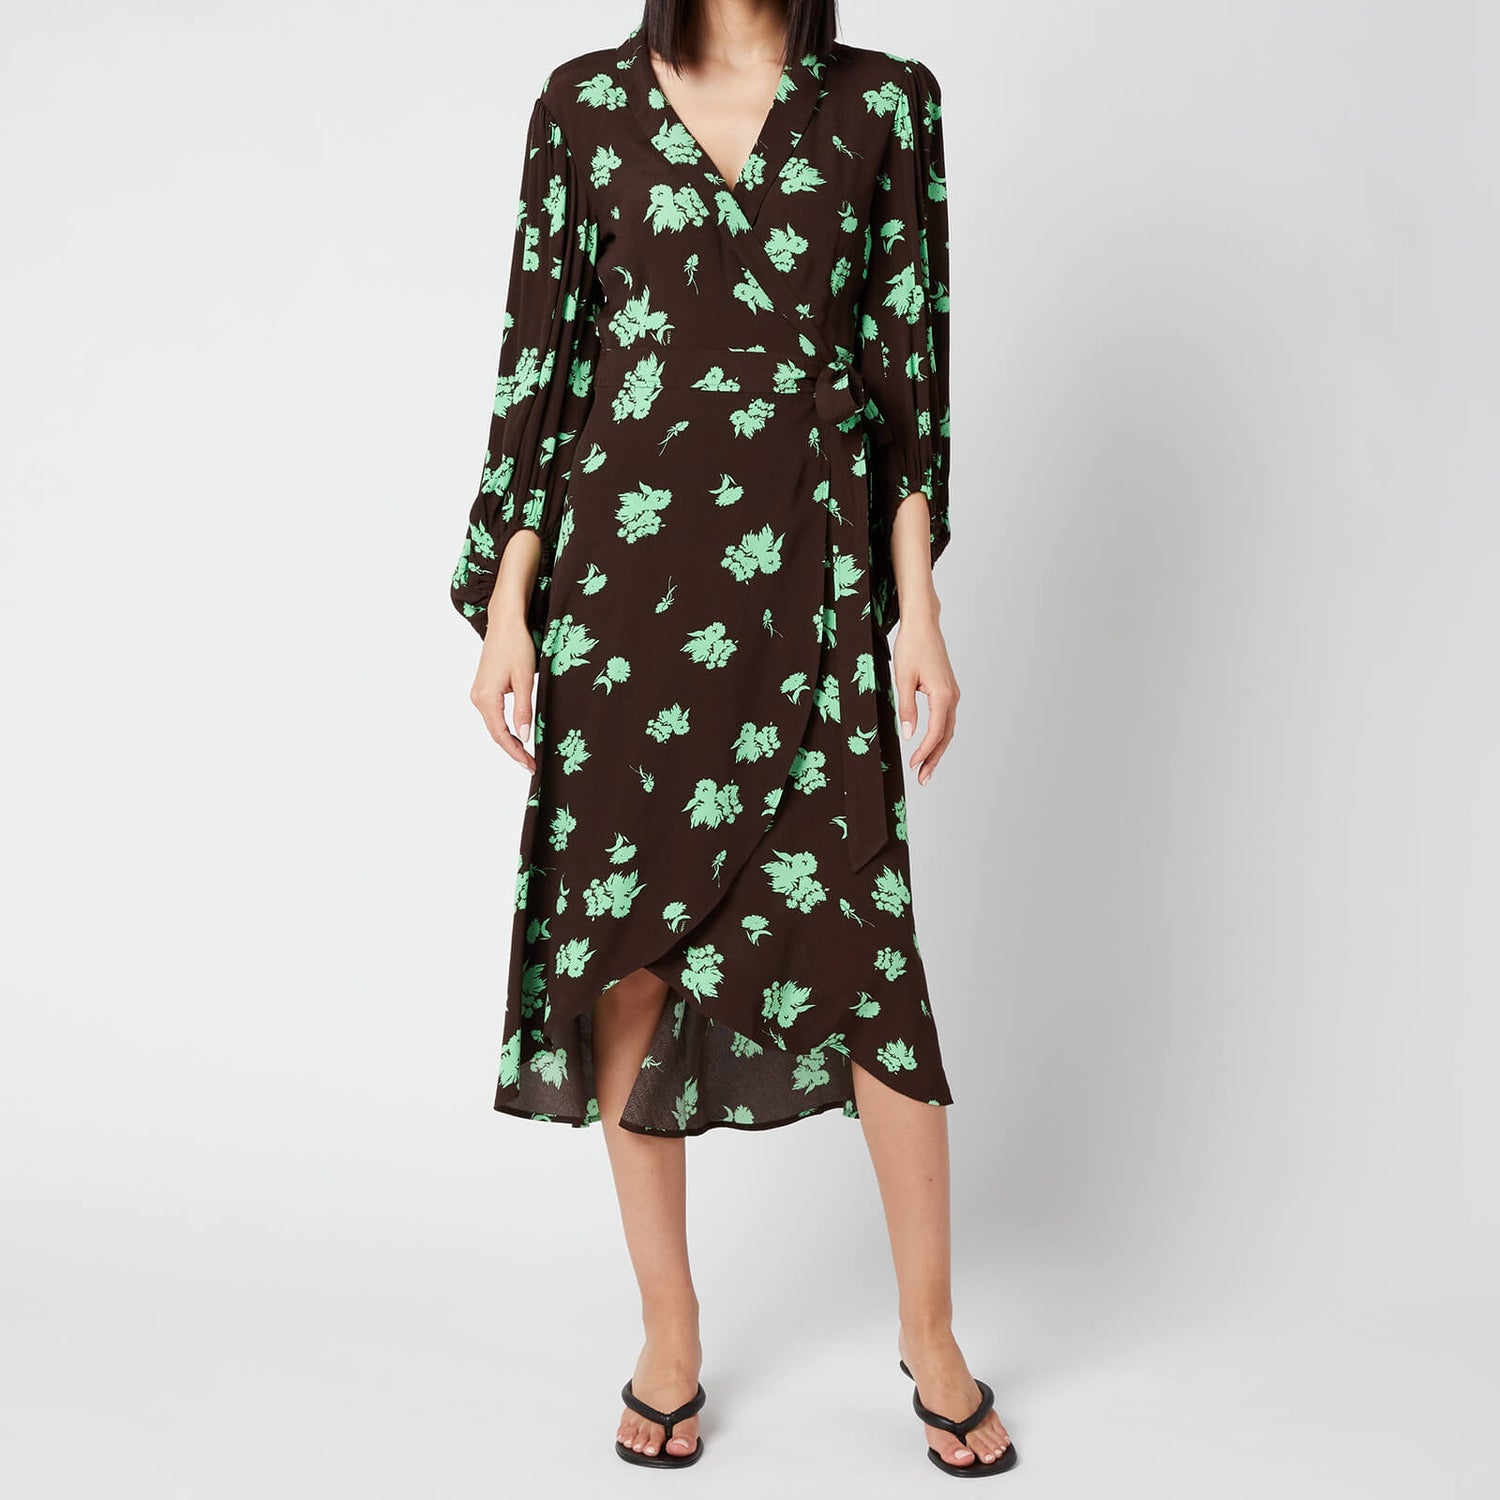 Ganni Women's Printed Crepe Wrap Dress - Mole - Free UK Delivery Available